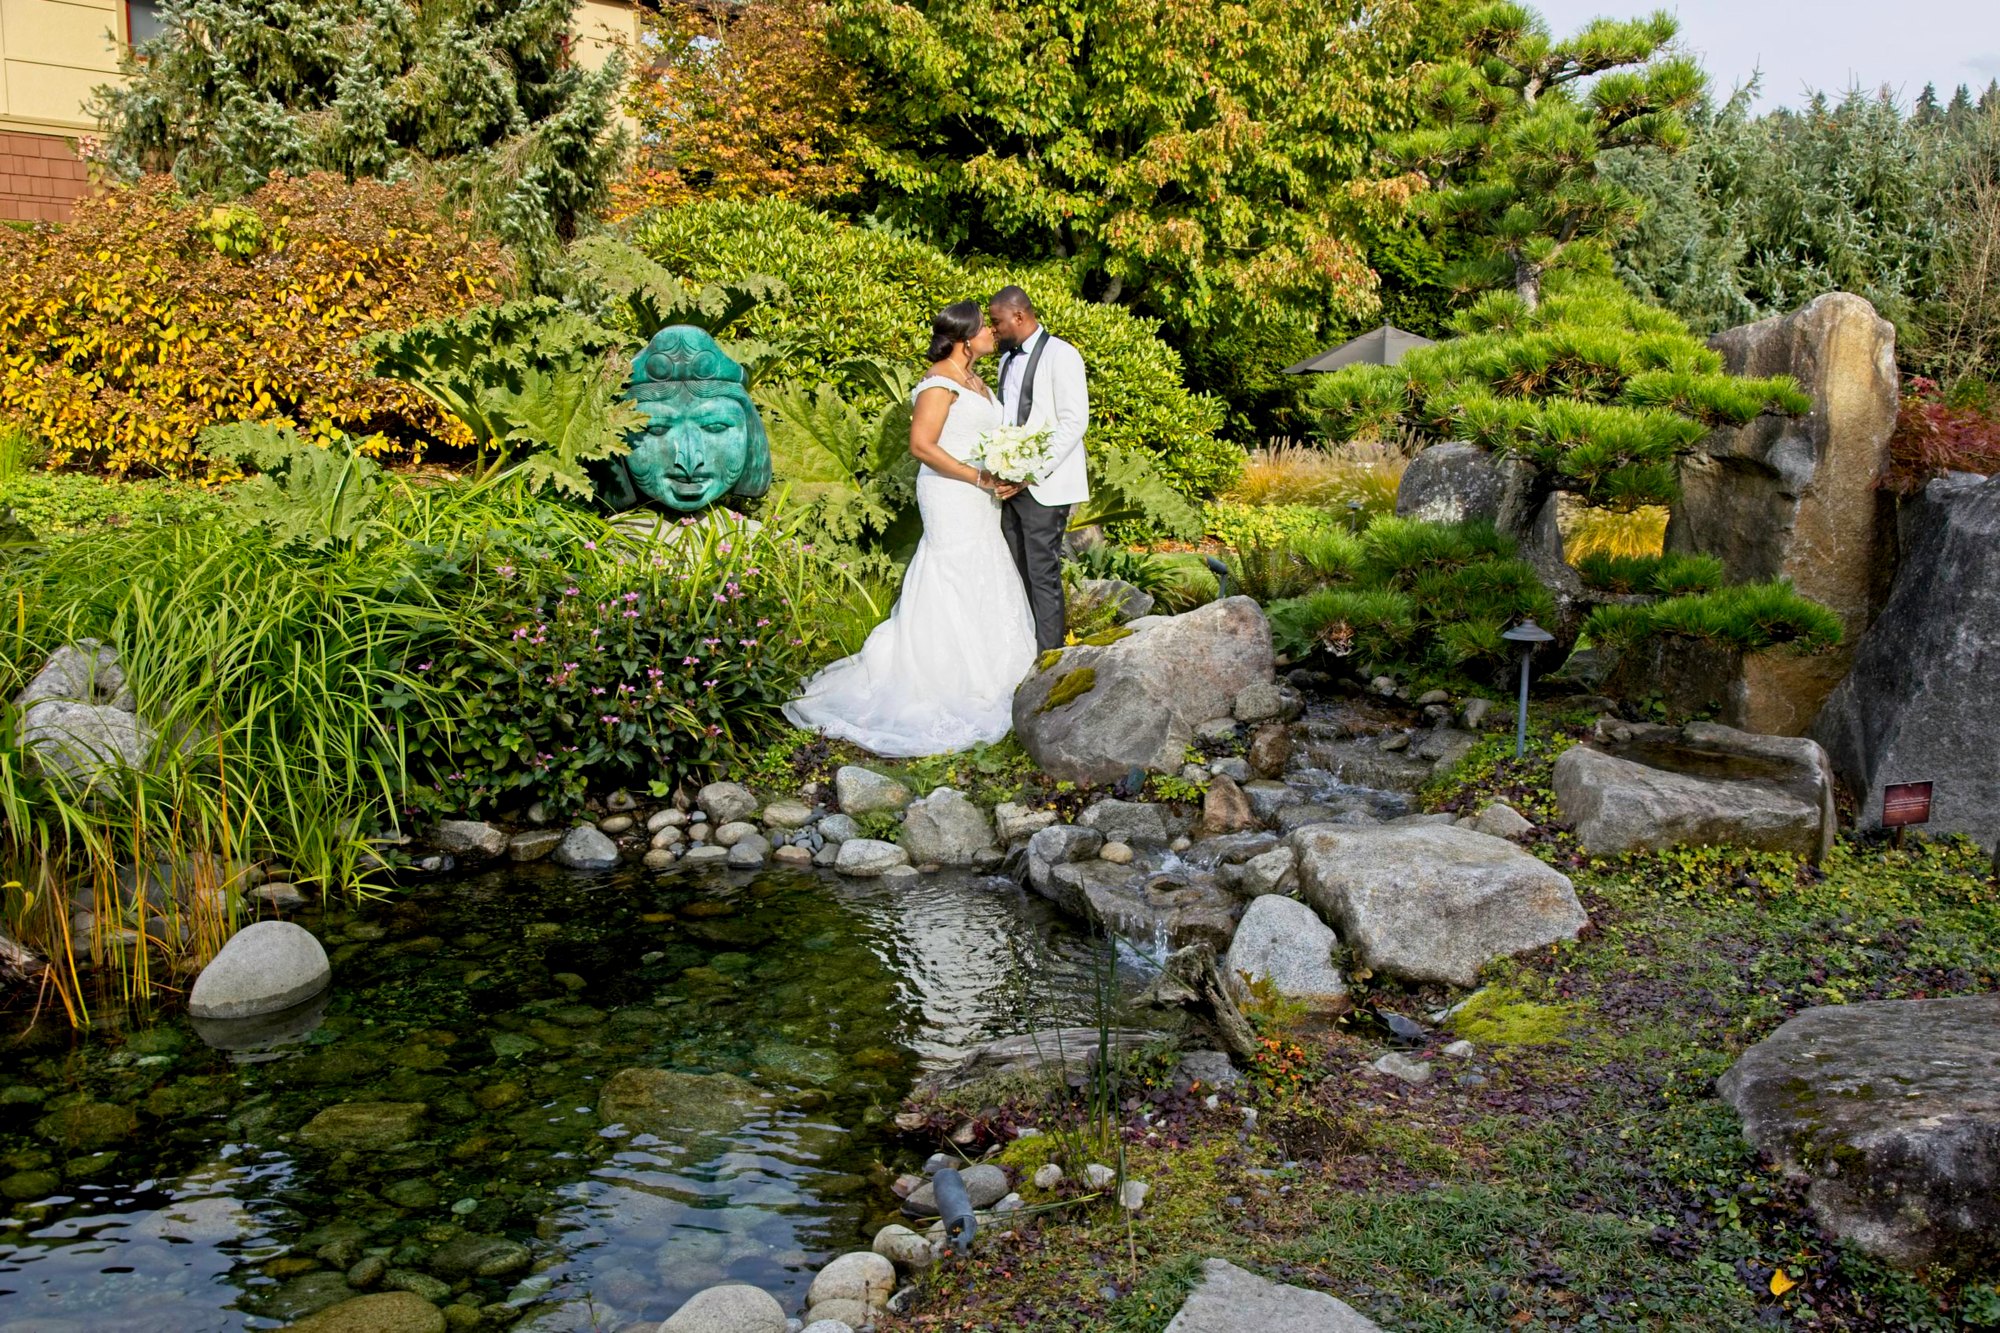 Sue and Shonanun in one of the gardens at Willows Lodge, shortly before their wedding ceremony. Tom Ellis Photography, Seattle wedding photographer